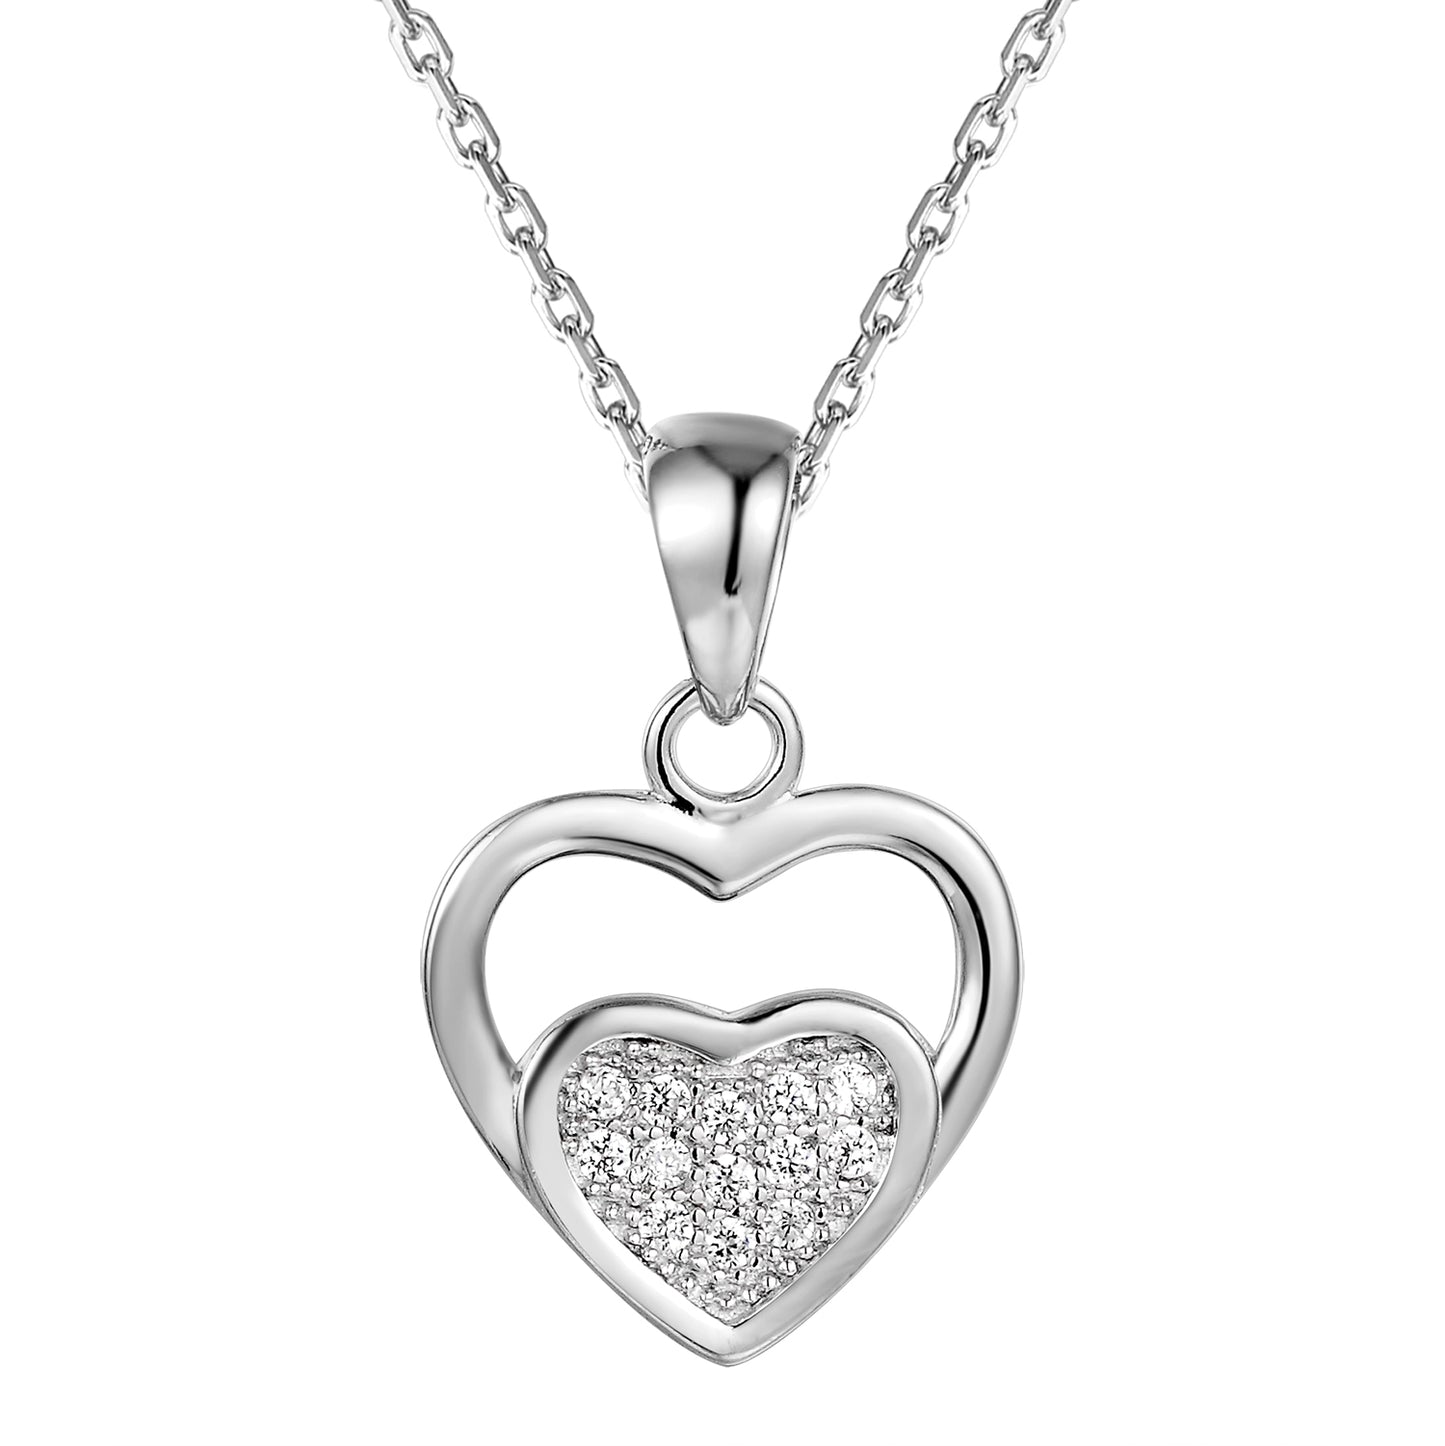 Double Heart Solitaire Sterling Silver Pendant Valentine's Gift